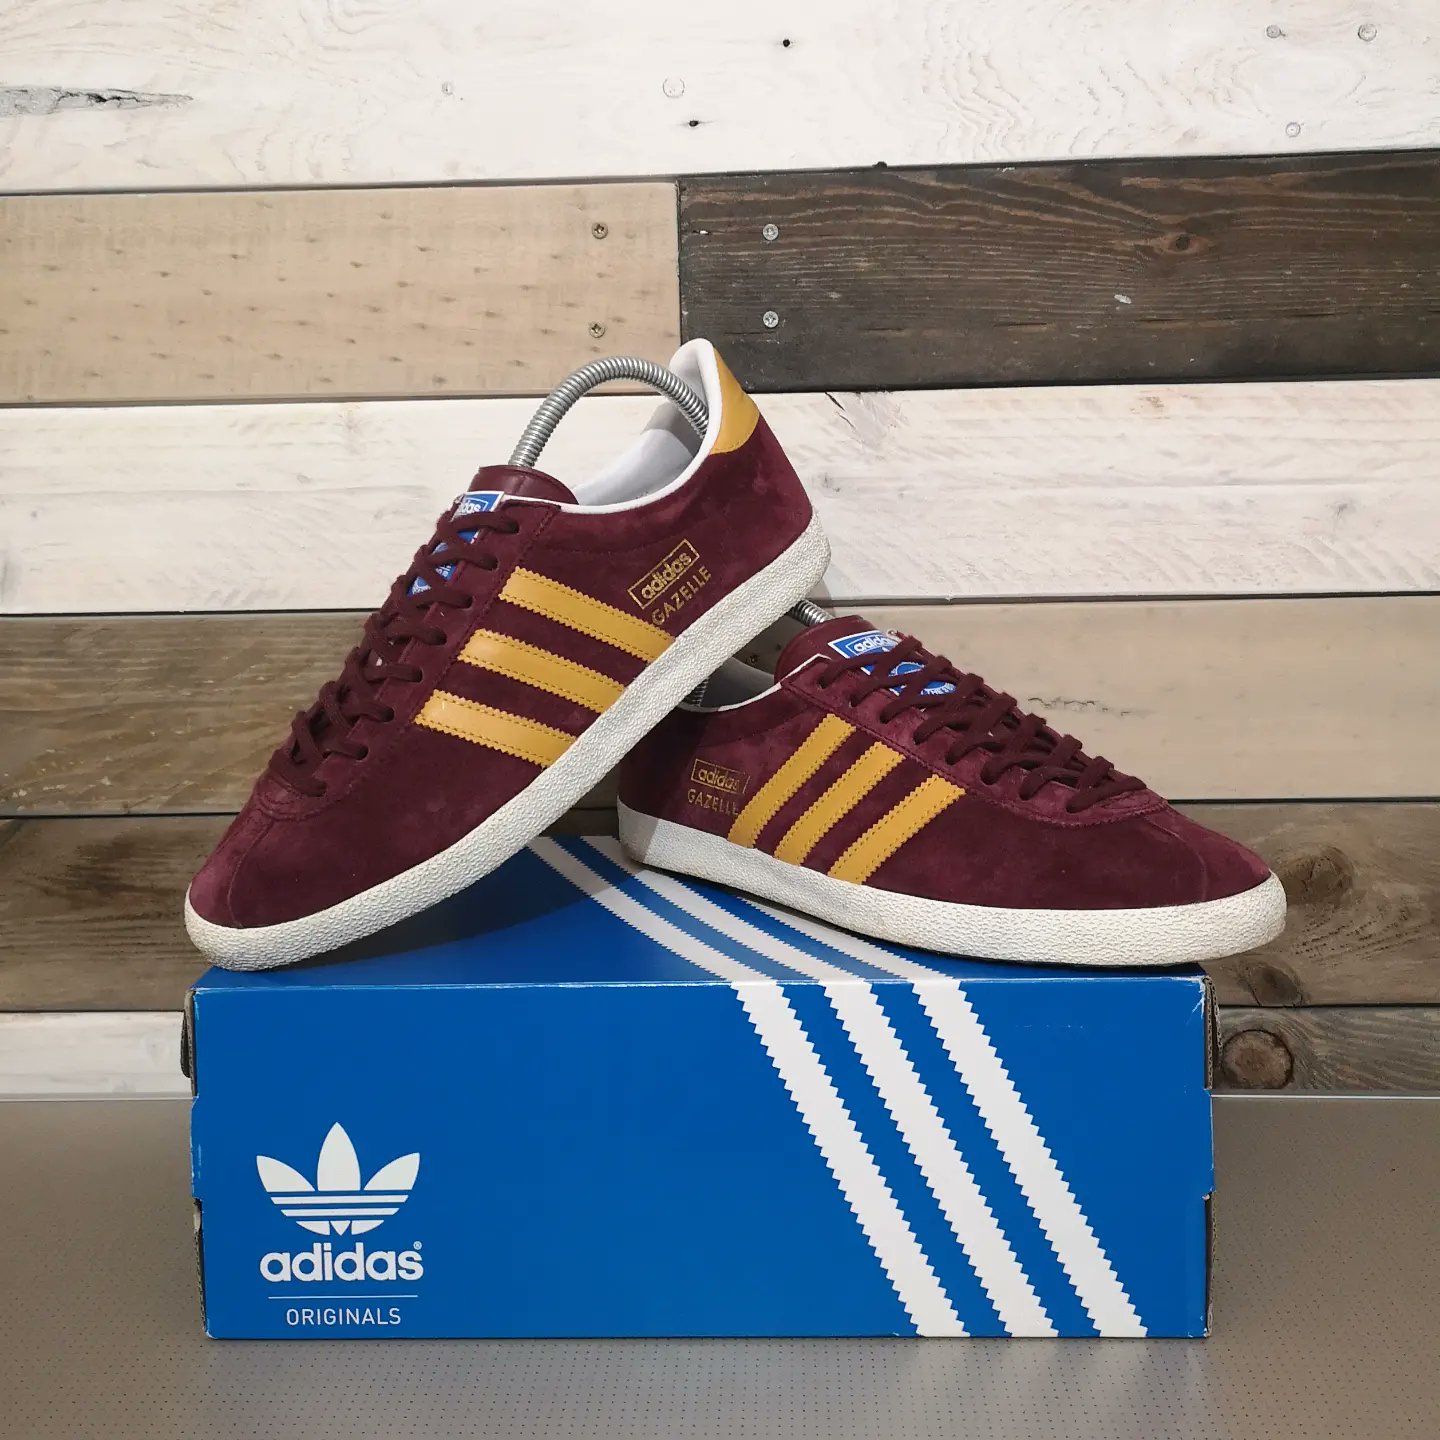 ley Centelleo Extraordinario TheClobberDen on Twitter: "FOR SALE Adidas Gazelle OG • Size 8 • Price -  £32 • No Box • Released 04/2013 • Product Code - G96697 • Light Maroon /  Metallic Gold https://t.co/QkamG121ef" / Twitter